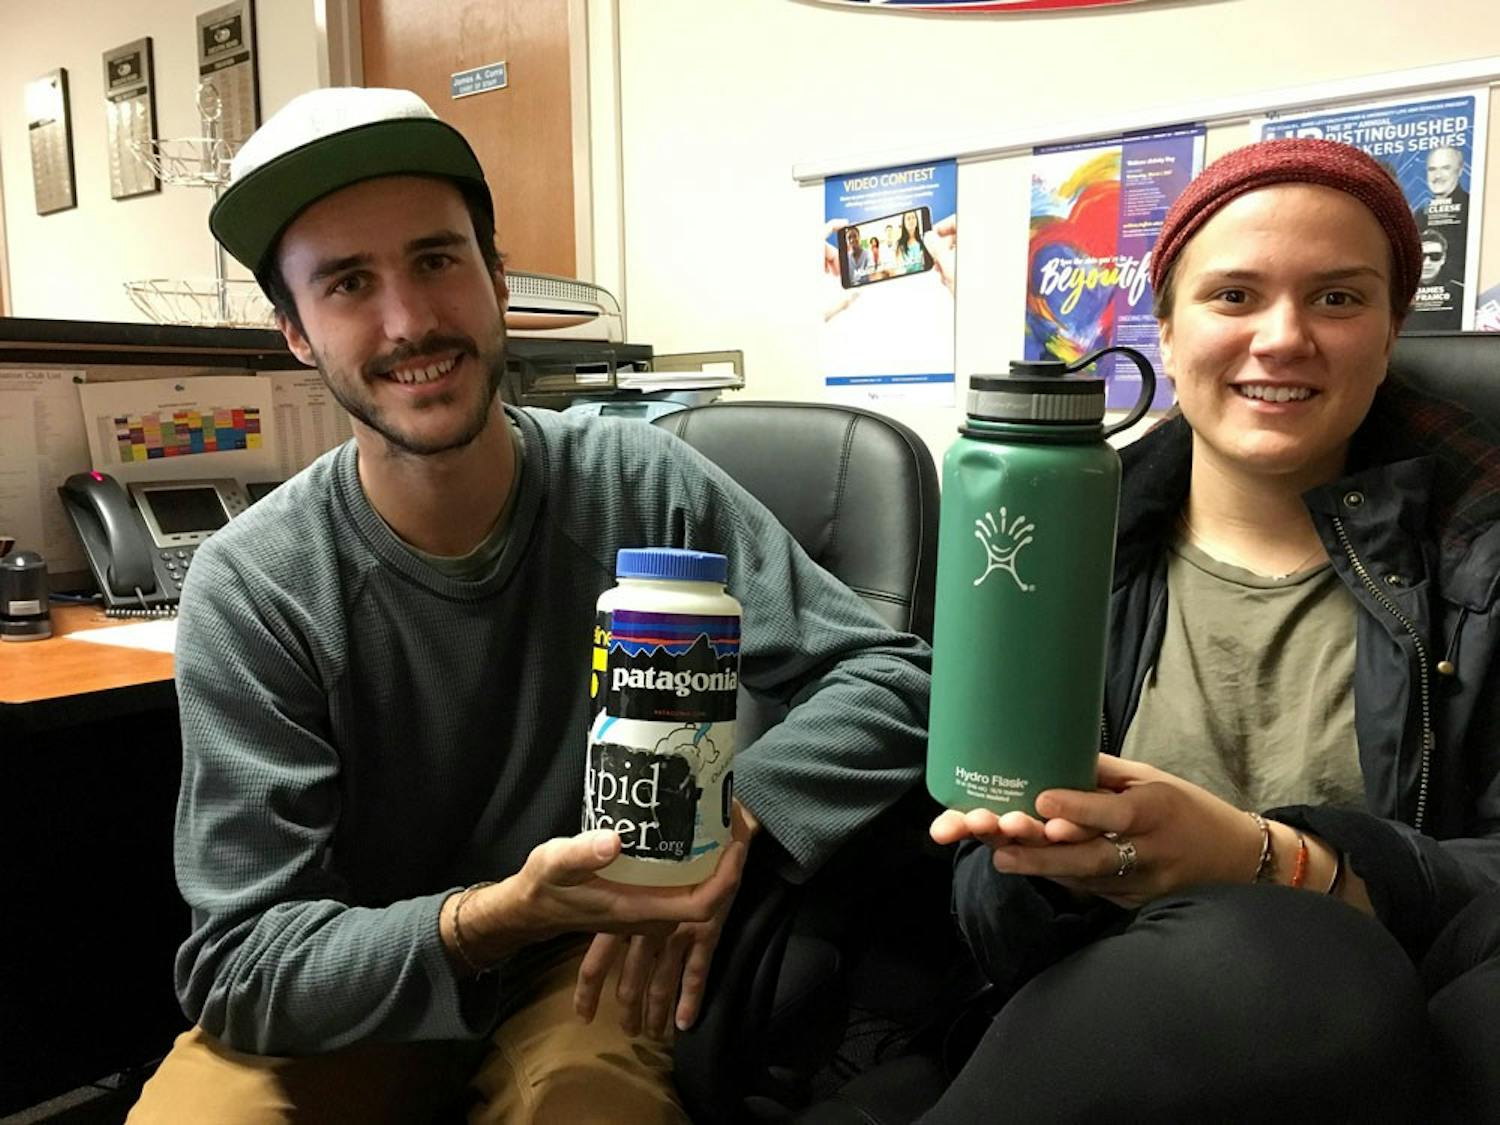 Brian Johnson and Anna Heintzman are members of UB’s Outdoor Adventure Club. Johnson and Heintzman take pride in personalizing their reusable water bottles.